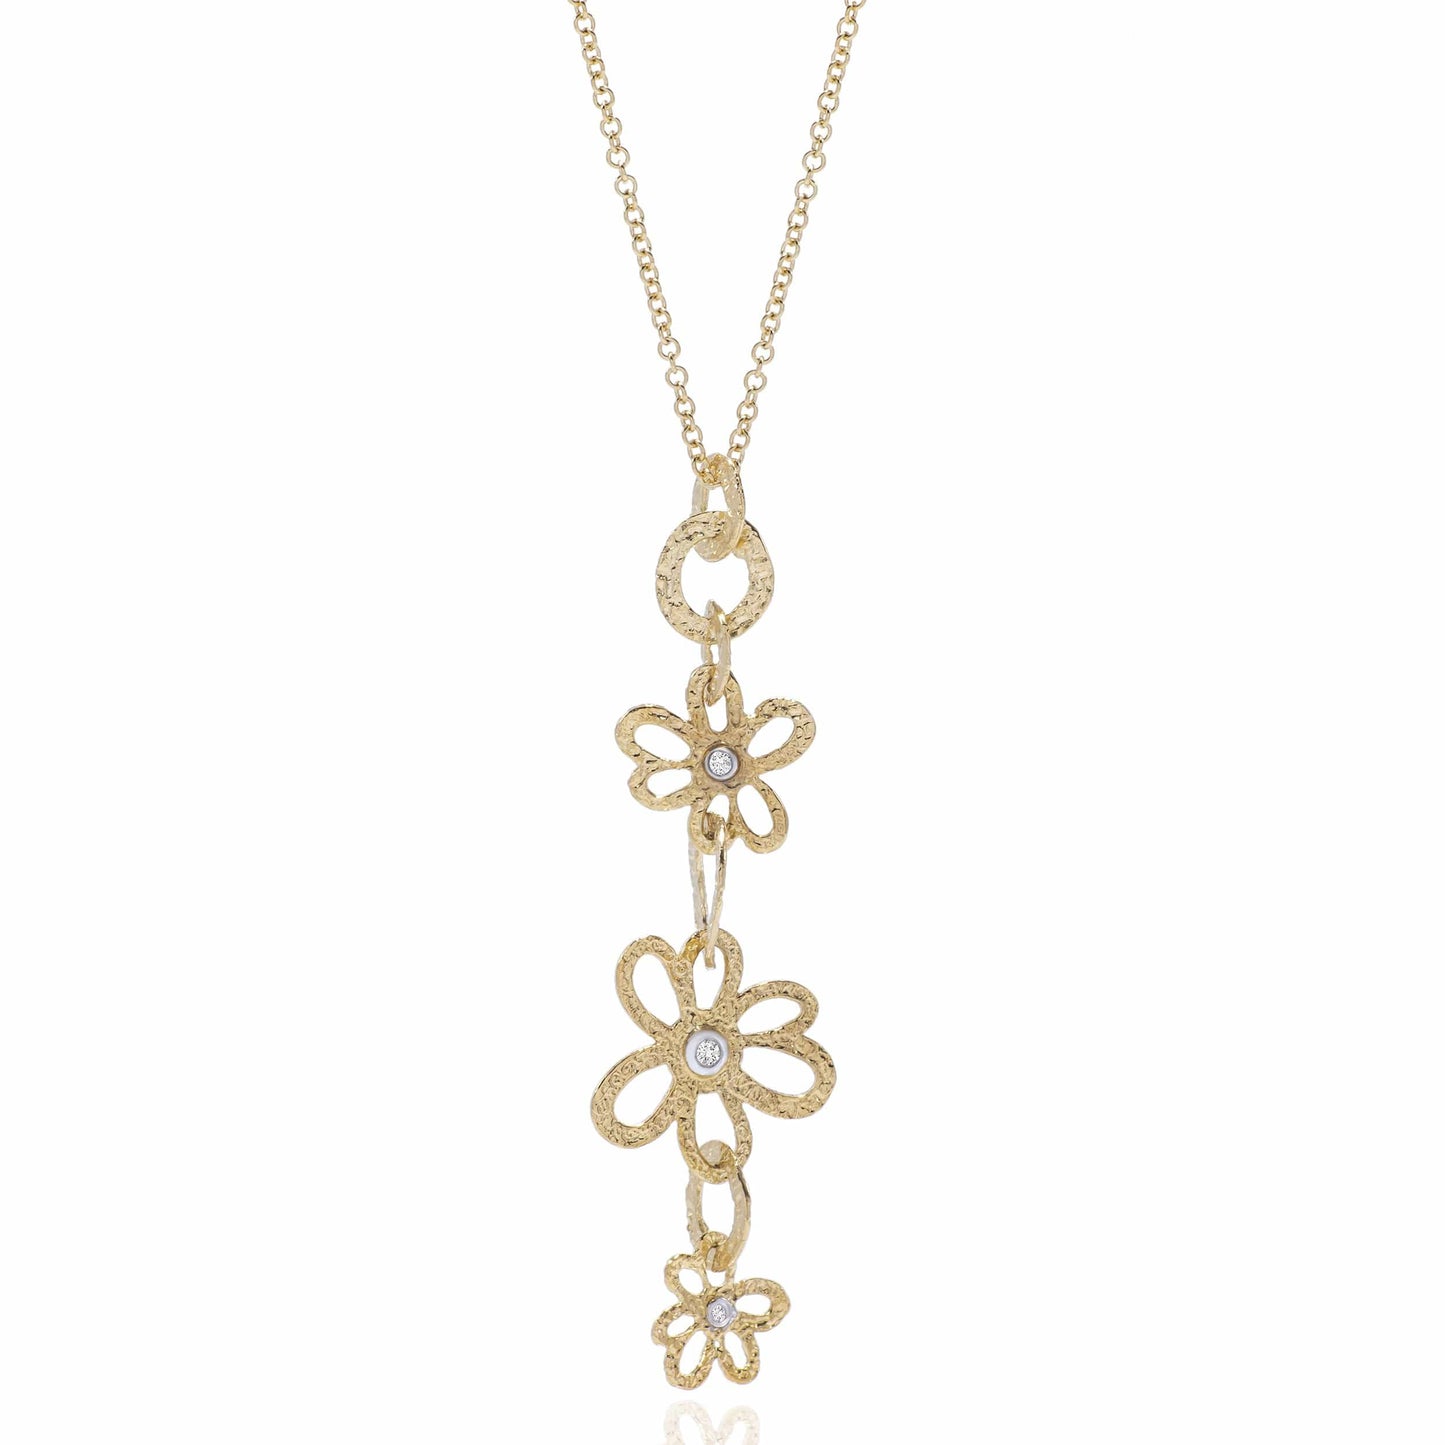 Dalia T Online Necklace Nature Collection 14KT Yellow Gold & Diamonds Flower Combination Necklace